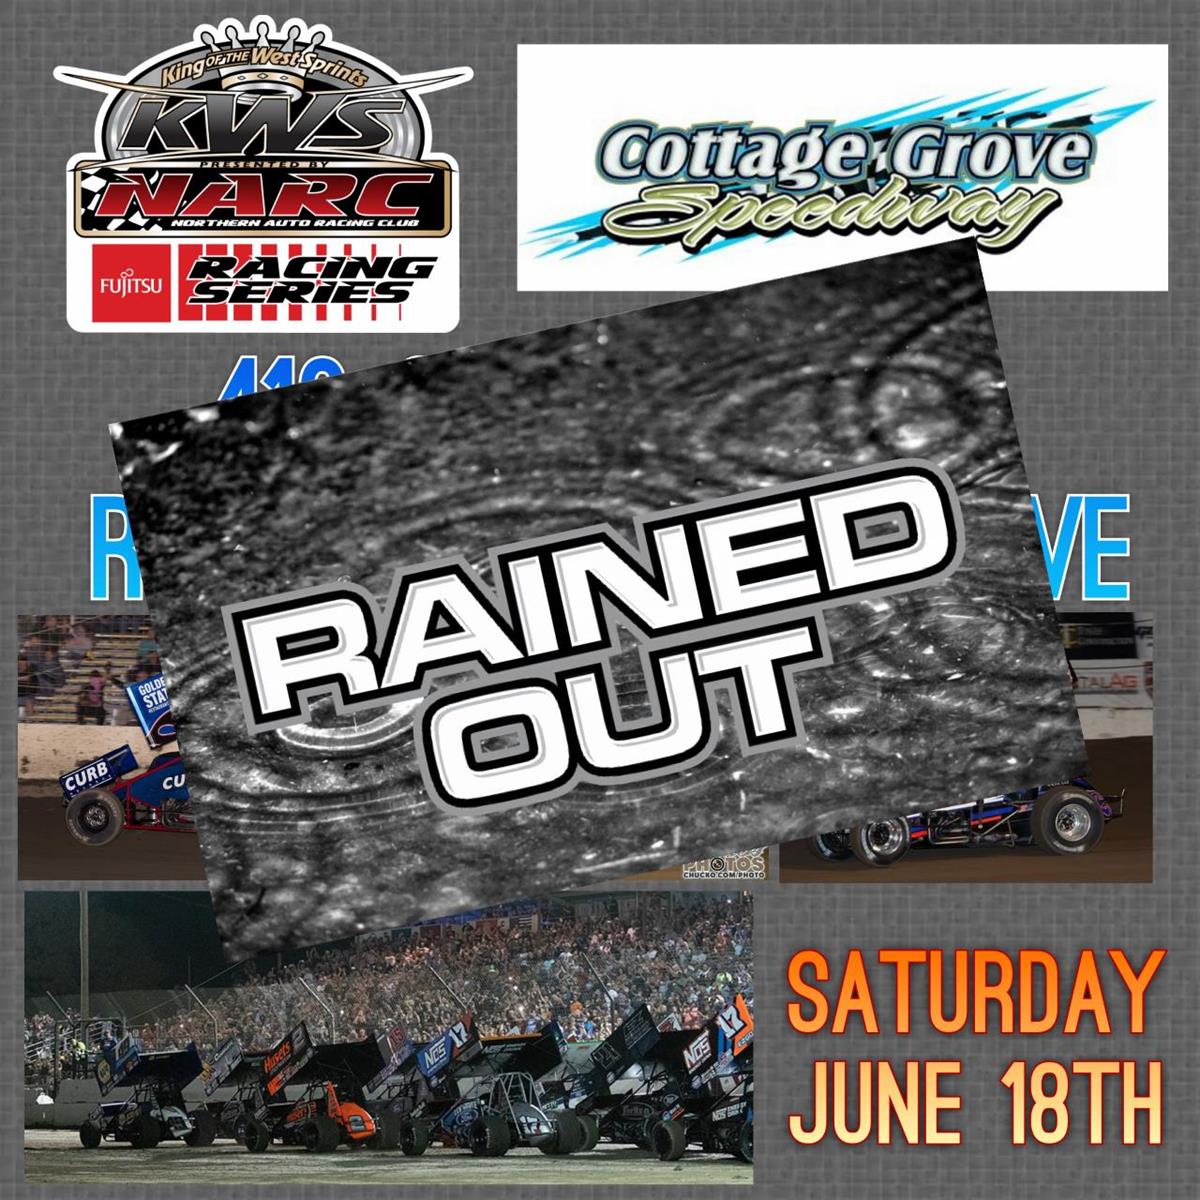 SATURDAY, JUNE 18TH RAINED OUT....  READ STORY FOR REFUND DETAILS